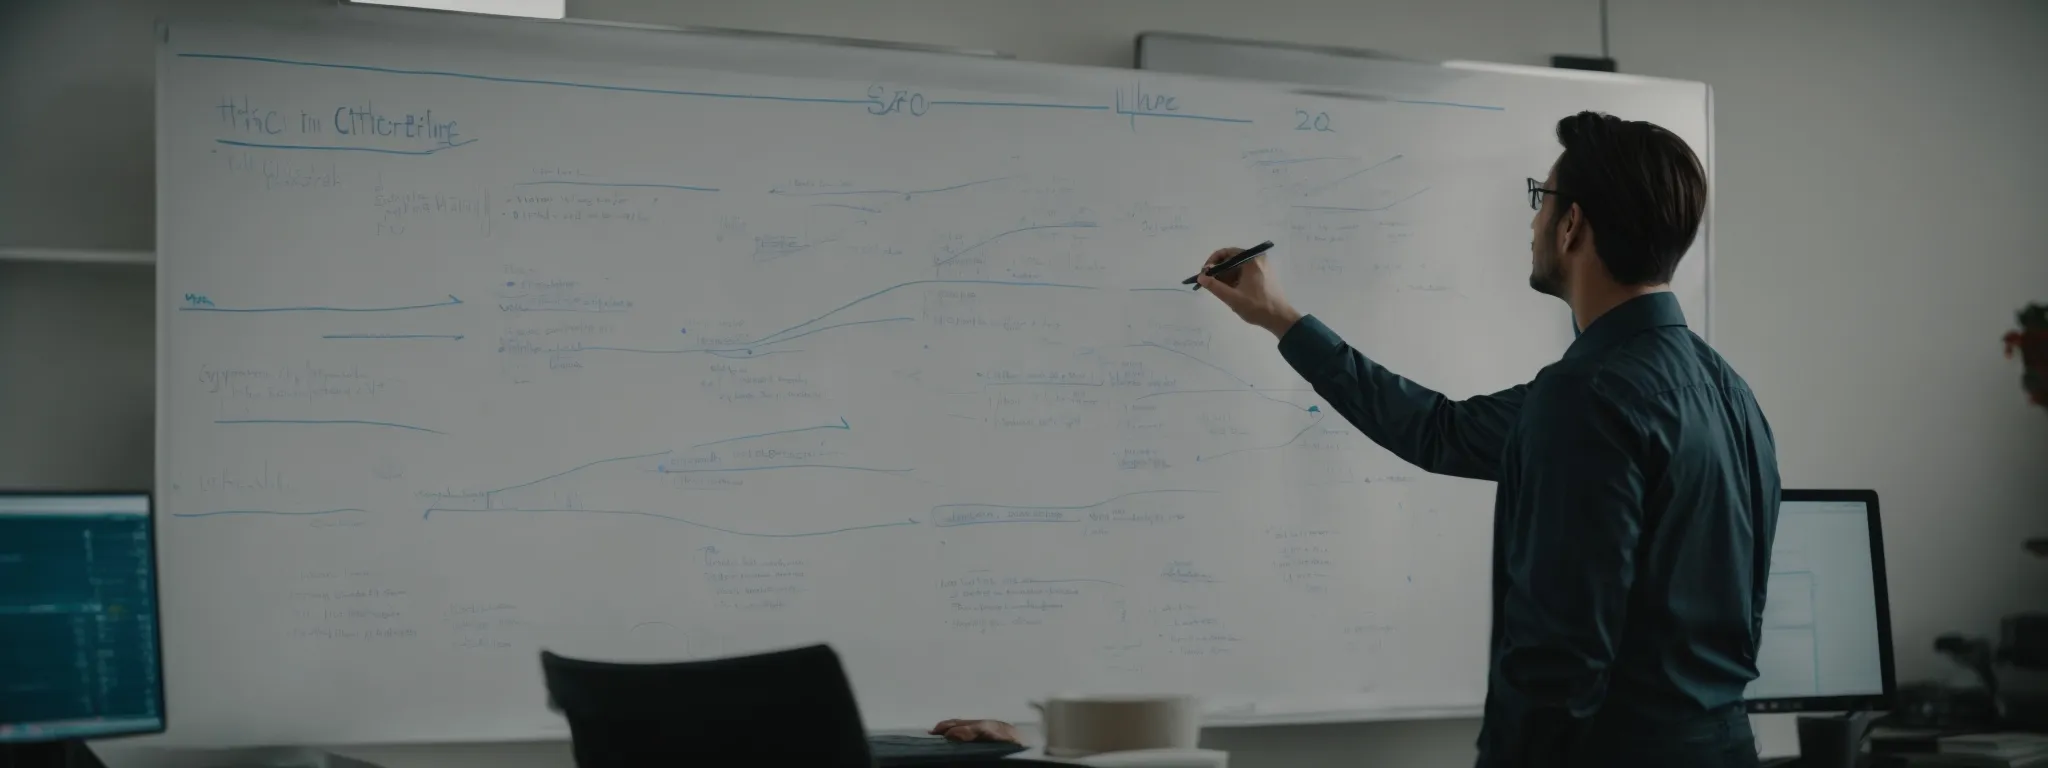 a content strategist brainstorming a future-oriented seo plan on a whiteboard amidst a high-tech office setting.